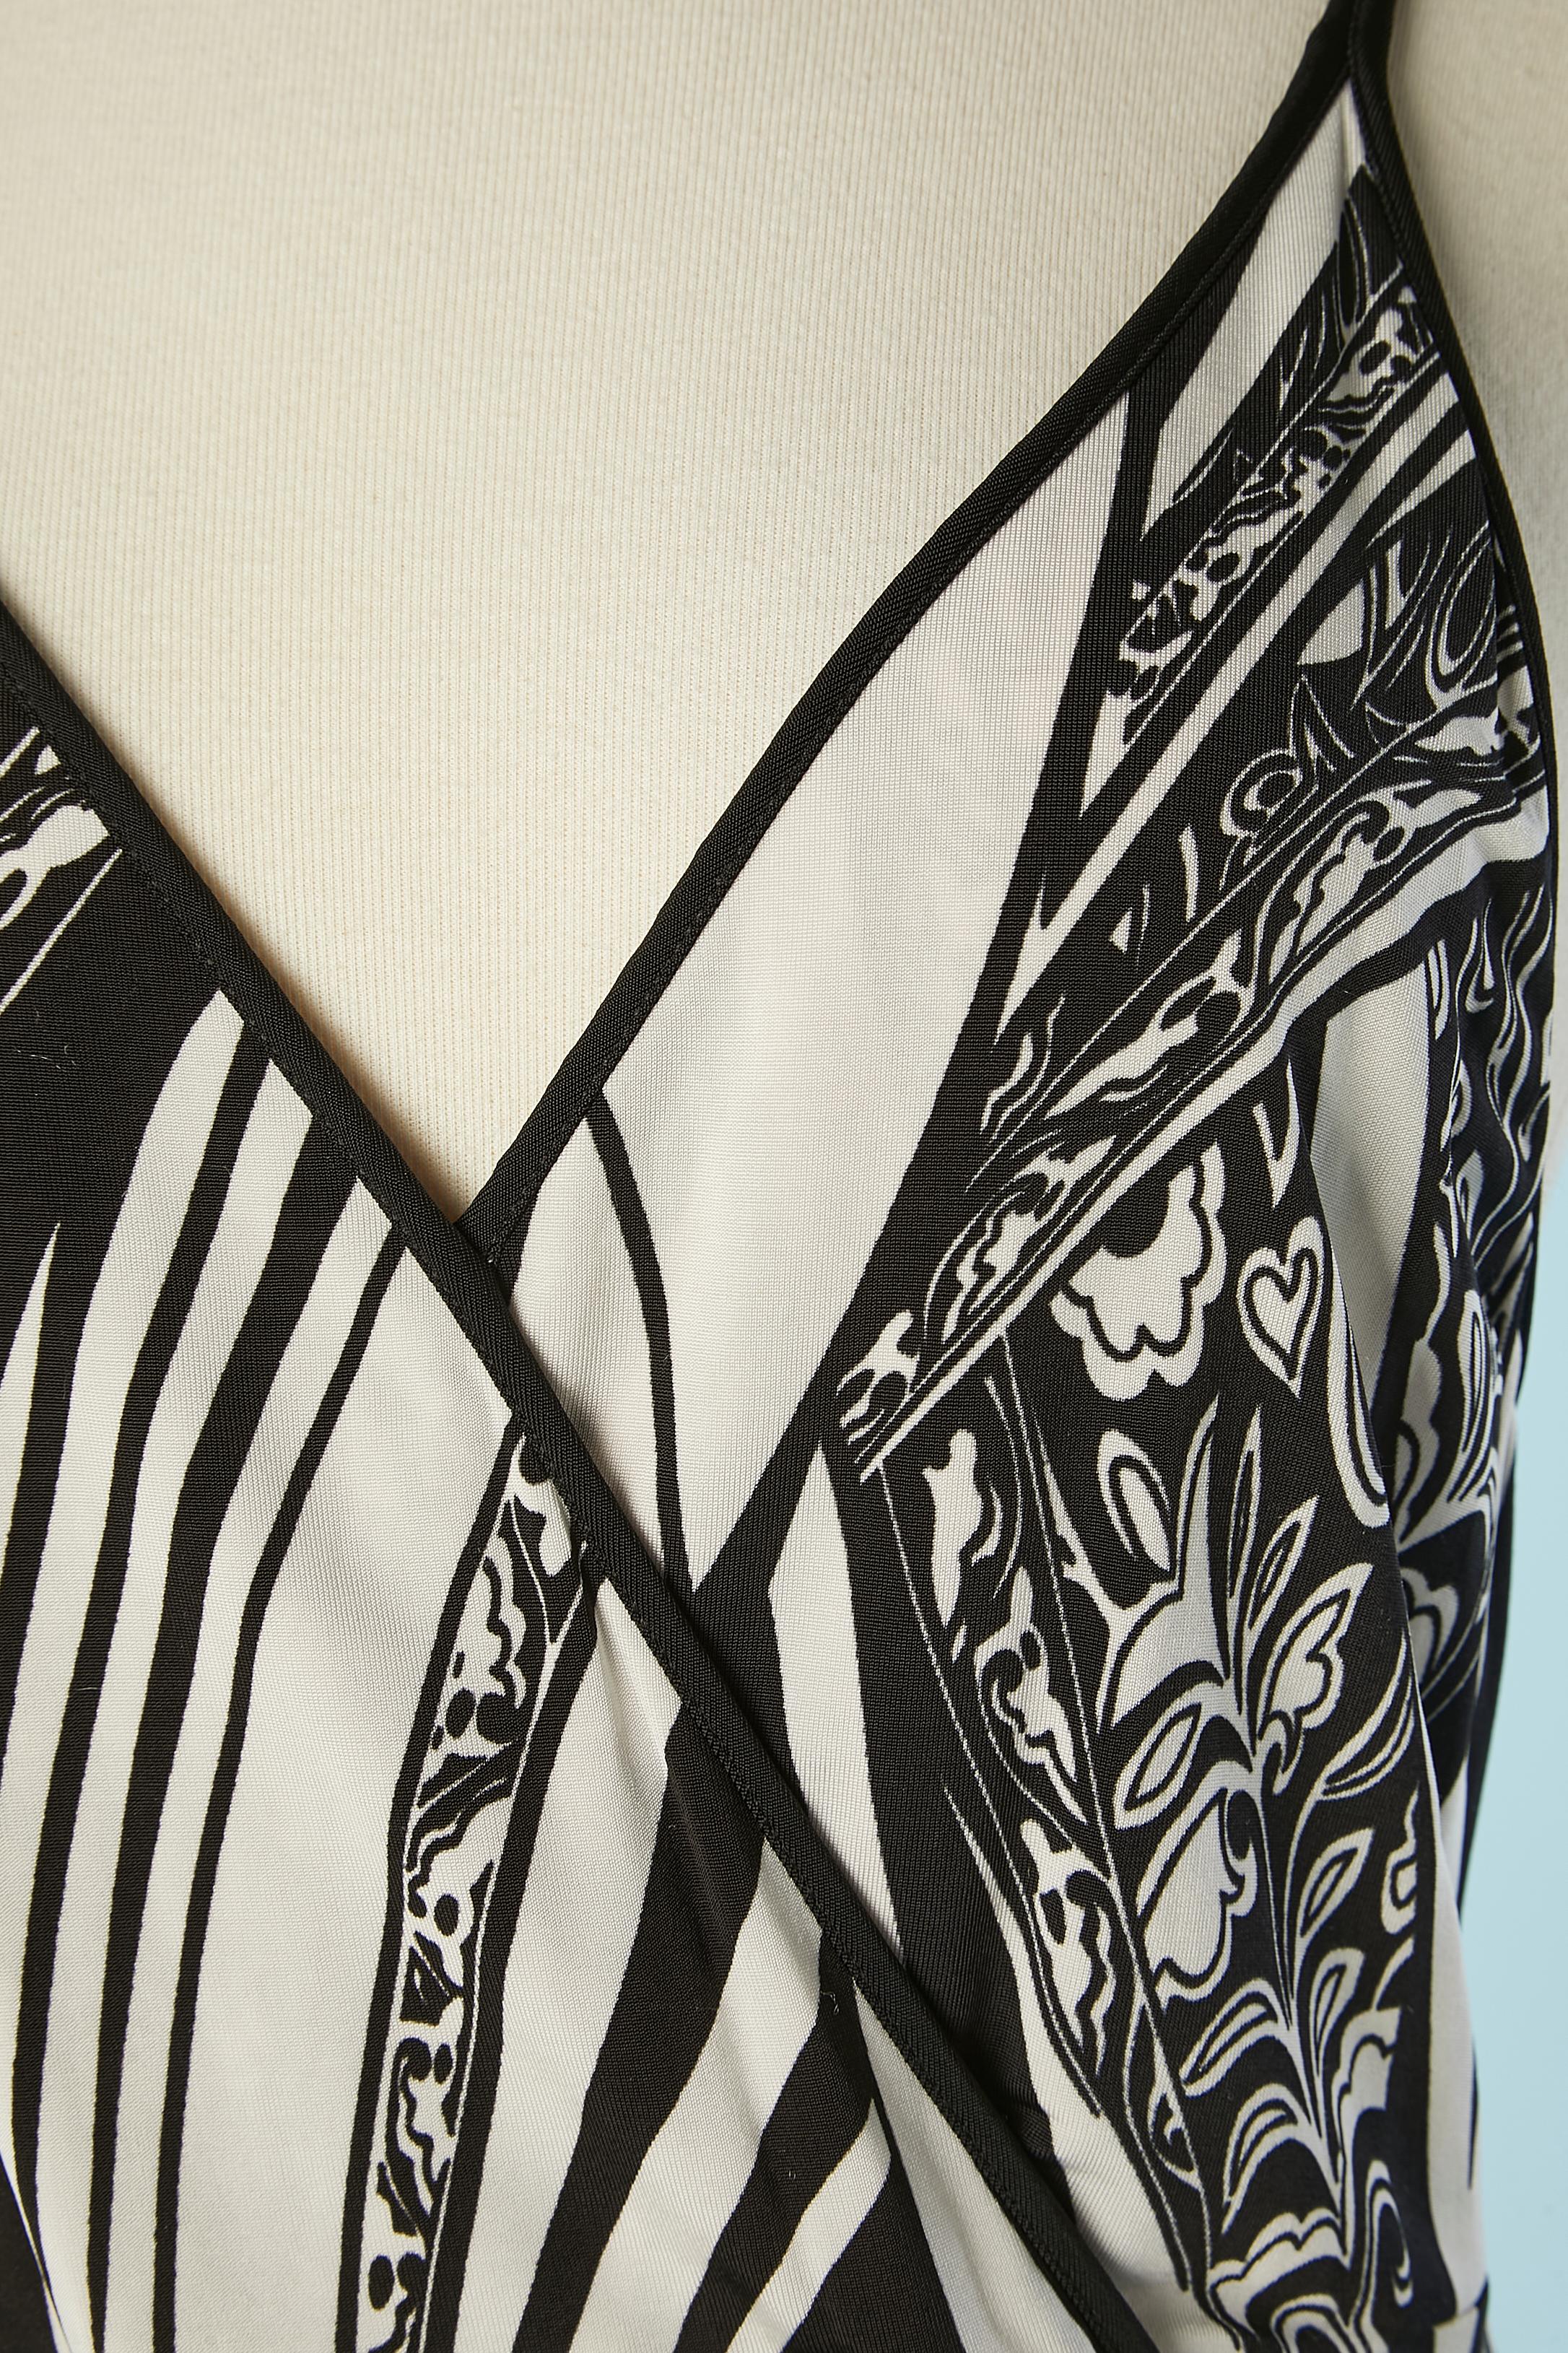 Black&white printed jersey dress.Branded fabric . Fabric composition: 90% rayon, 10% stretch.
Wrap top. NO BRAND tag but authenticity hologram. 
SIZE M